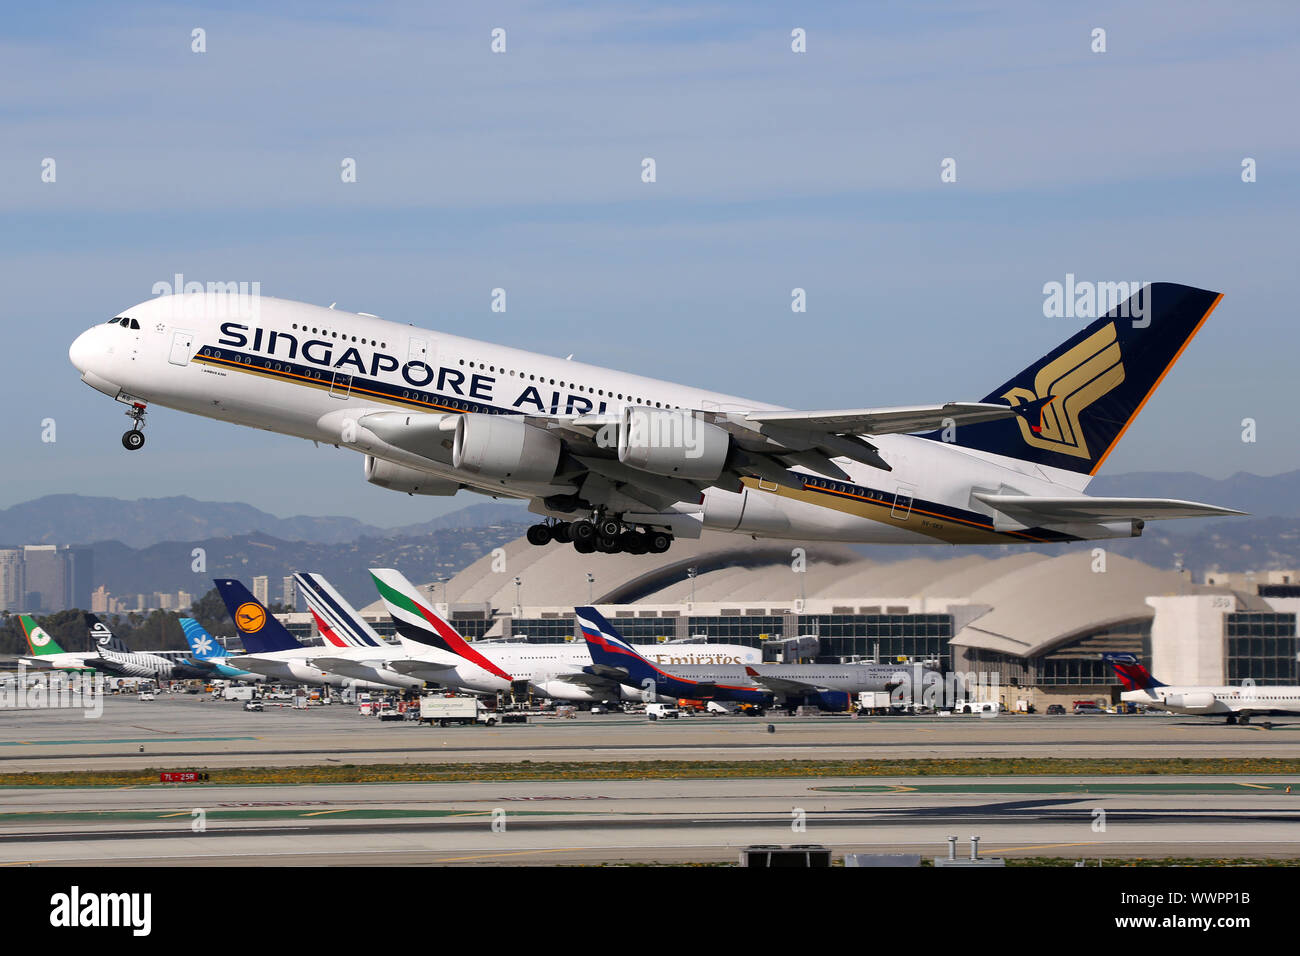 Singapore Airlines Airbus A380 Flugzeug Stockfoto